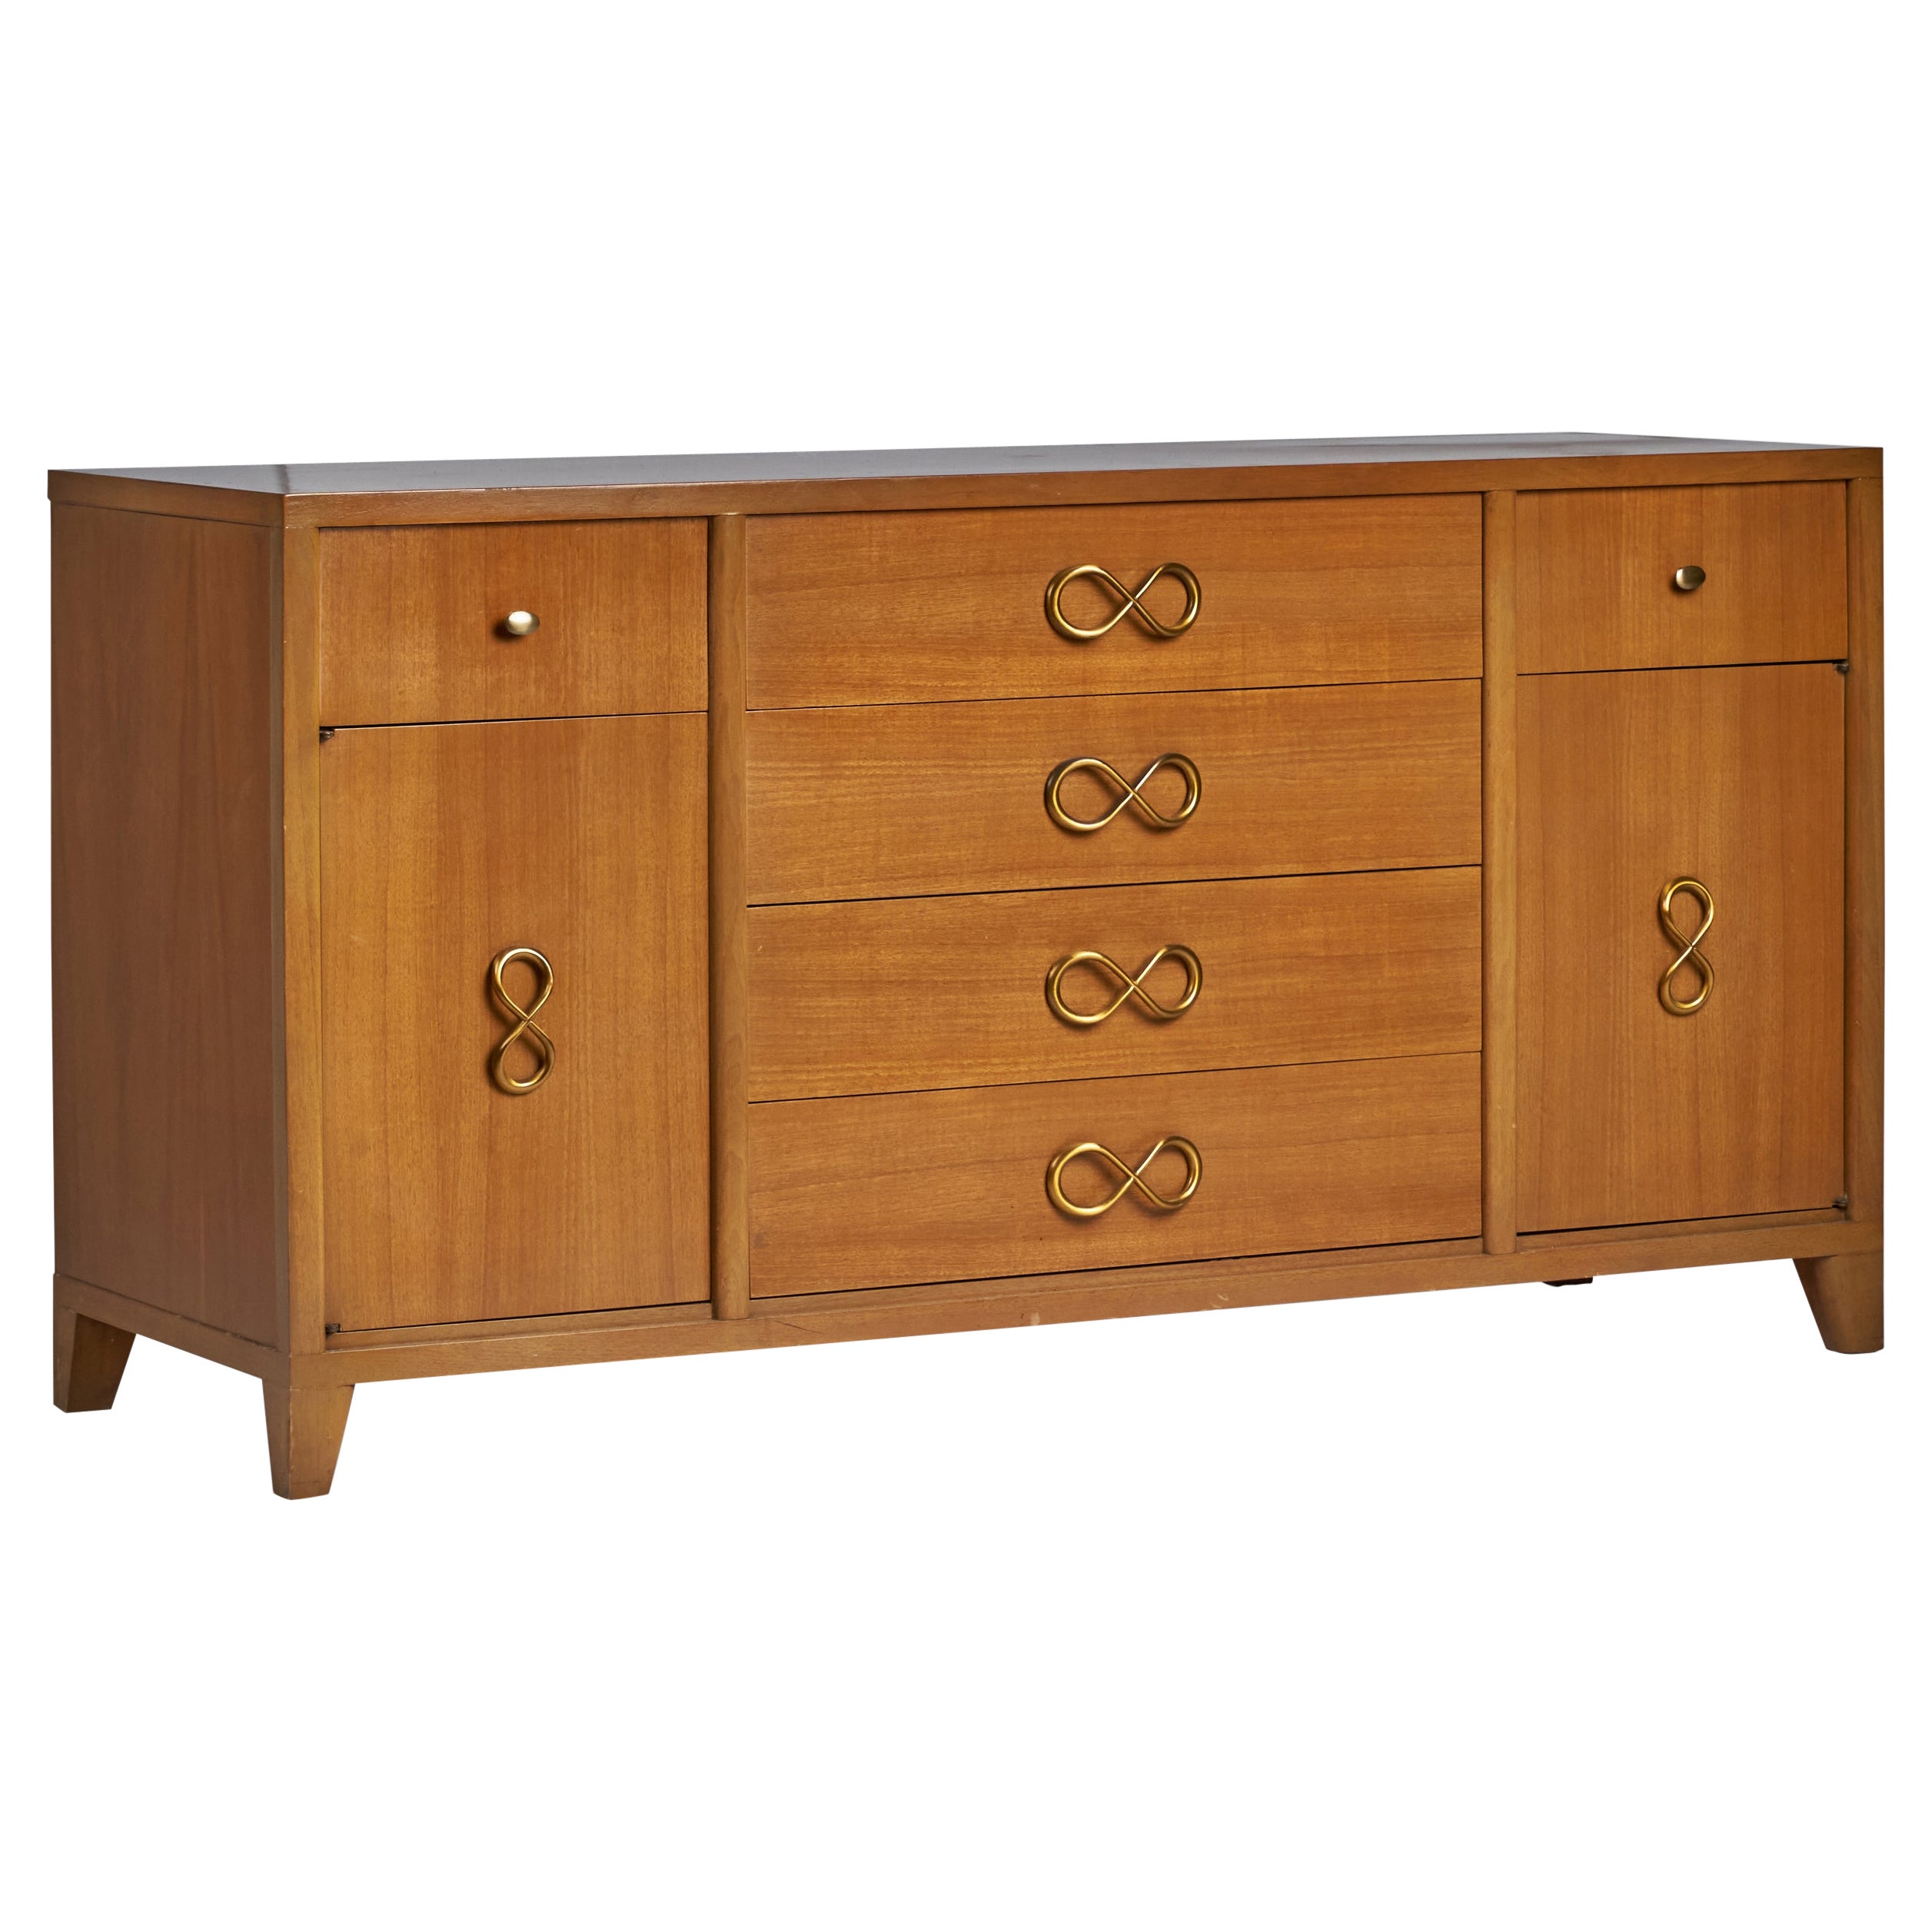 Red Lion Furniture, Cabinet, Walnut, Brass, USA, 1940s For Sale